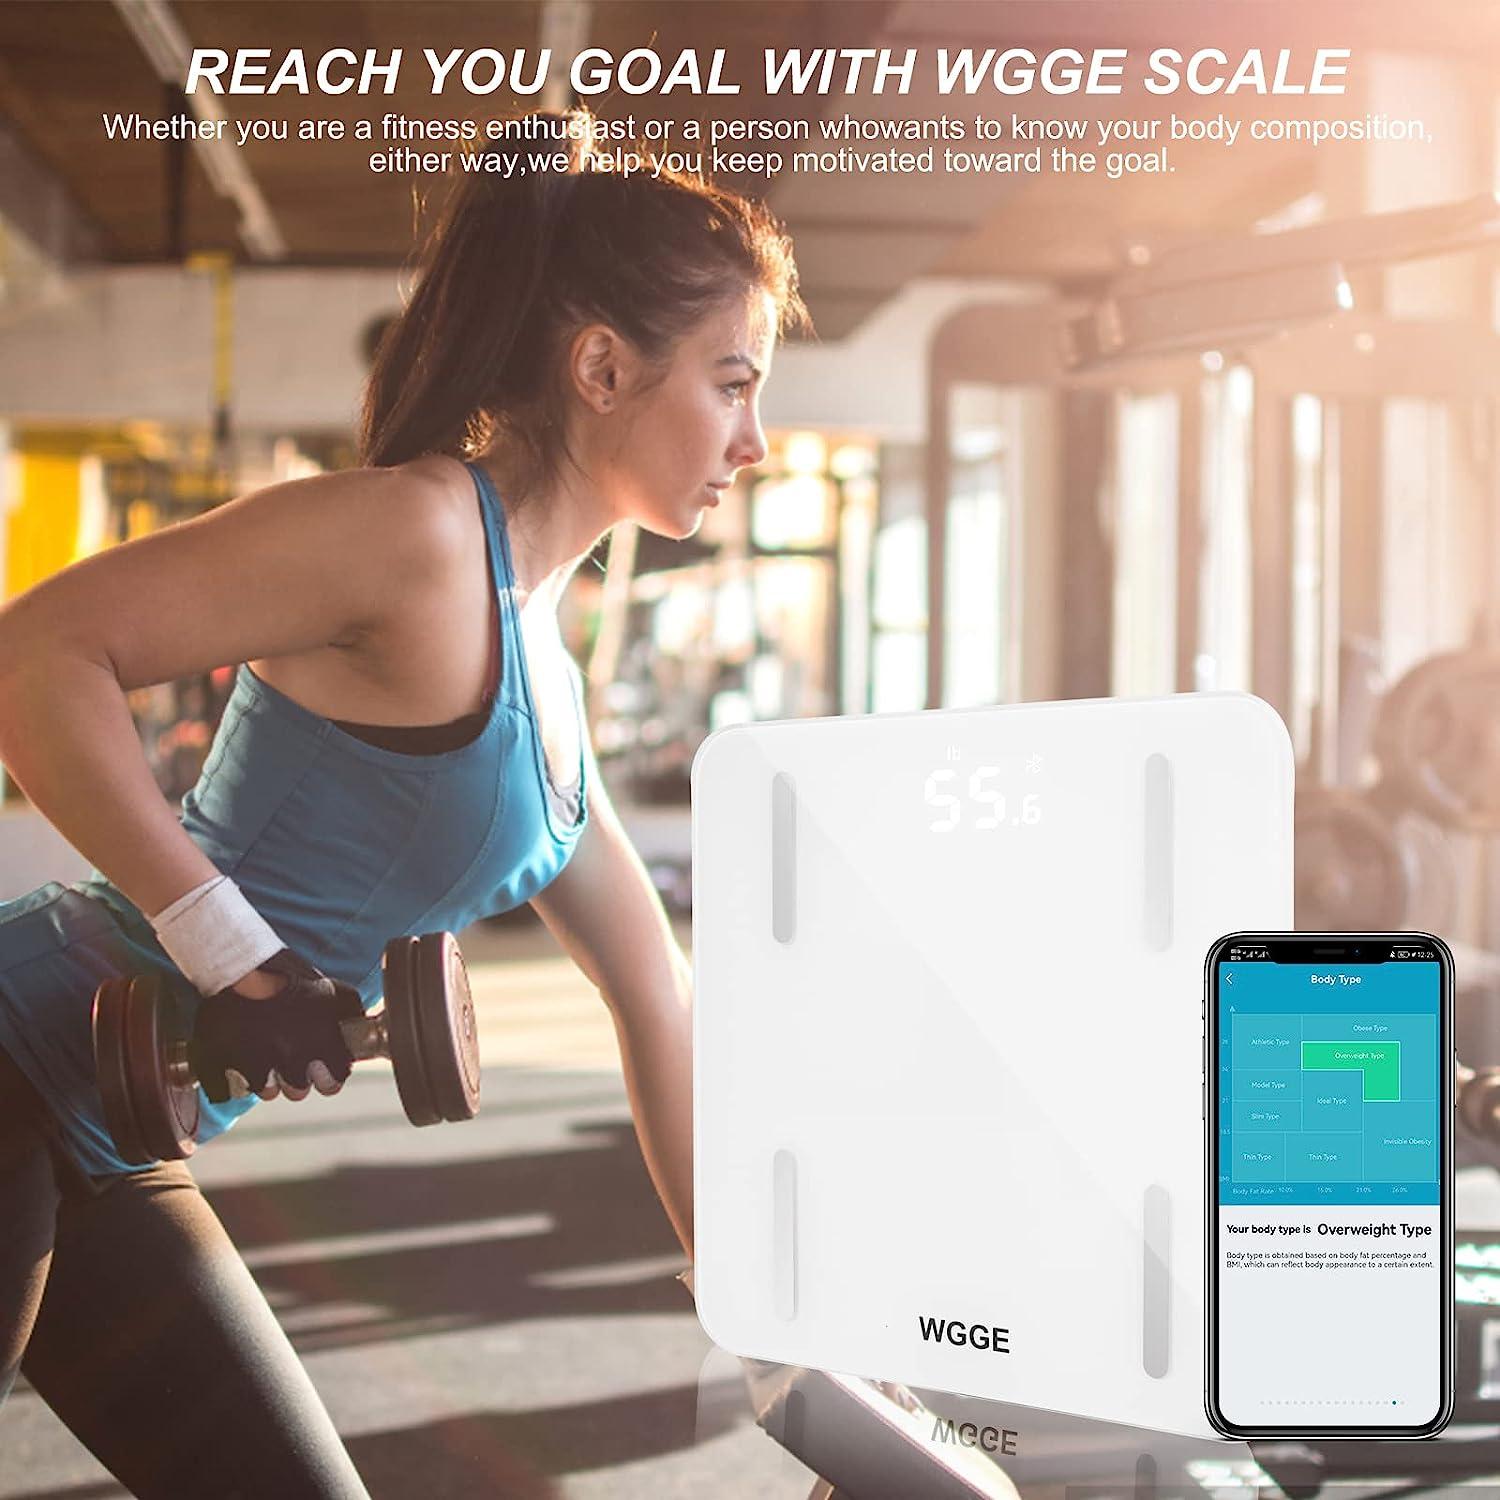 Bluetooth Smart Body Fat Scale with iOS and Android App, Including Weight,  BMI, Body Fat, Muscle Mass, Water Weight, and Bone Mass, etc.